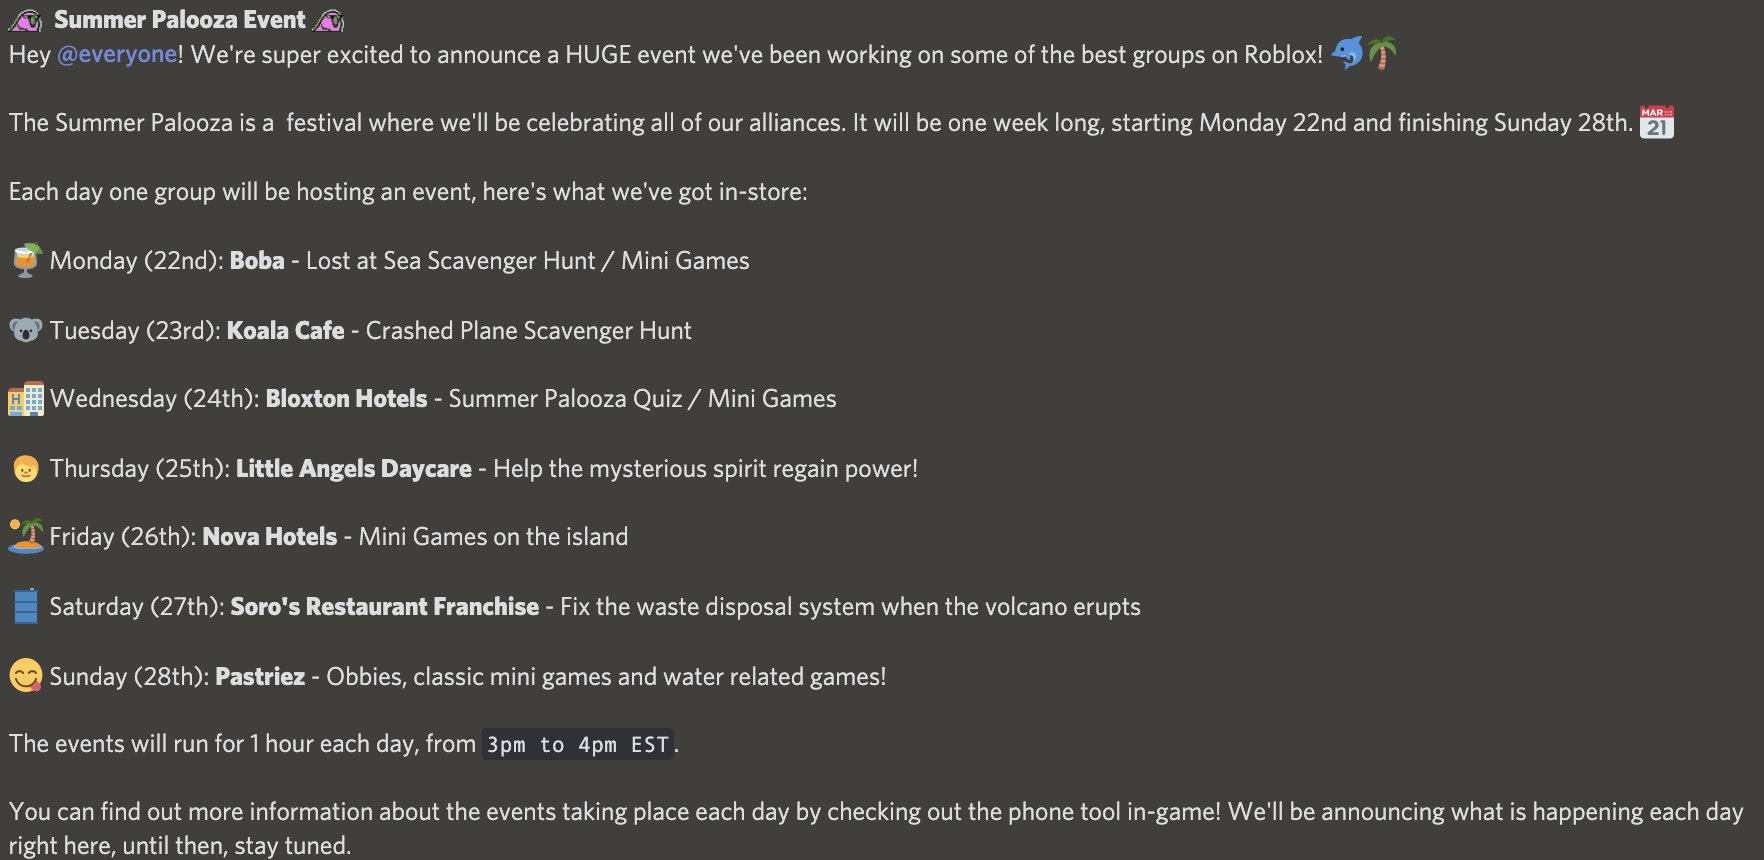 Soro S Restaurant On Twitter Summer Palooza Event Starts On Monday More Information In The Image - roblox obbies 1 hour